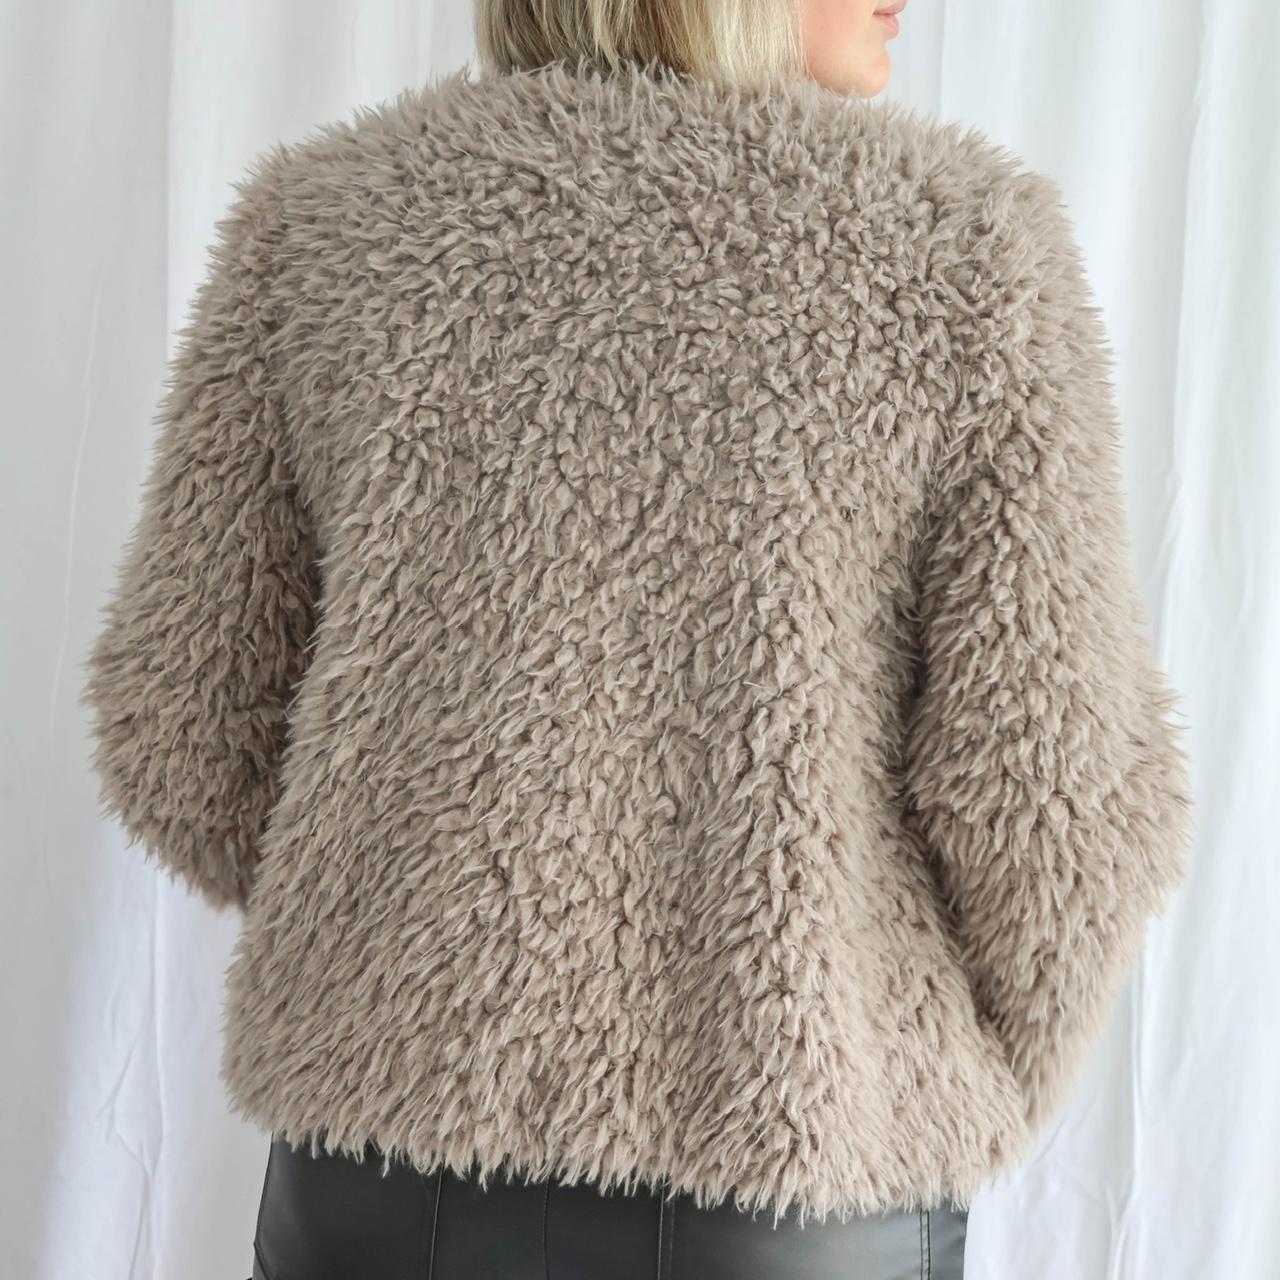 Shaggy Faux Fur Sweater Jacket in Taupe